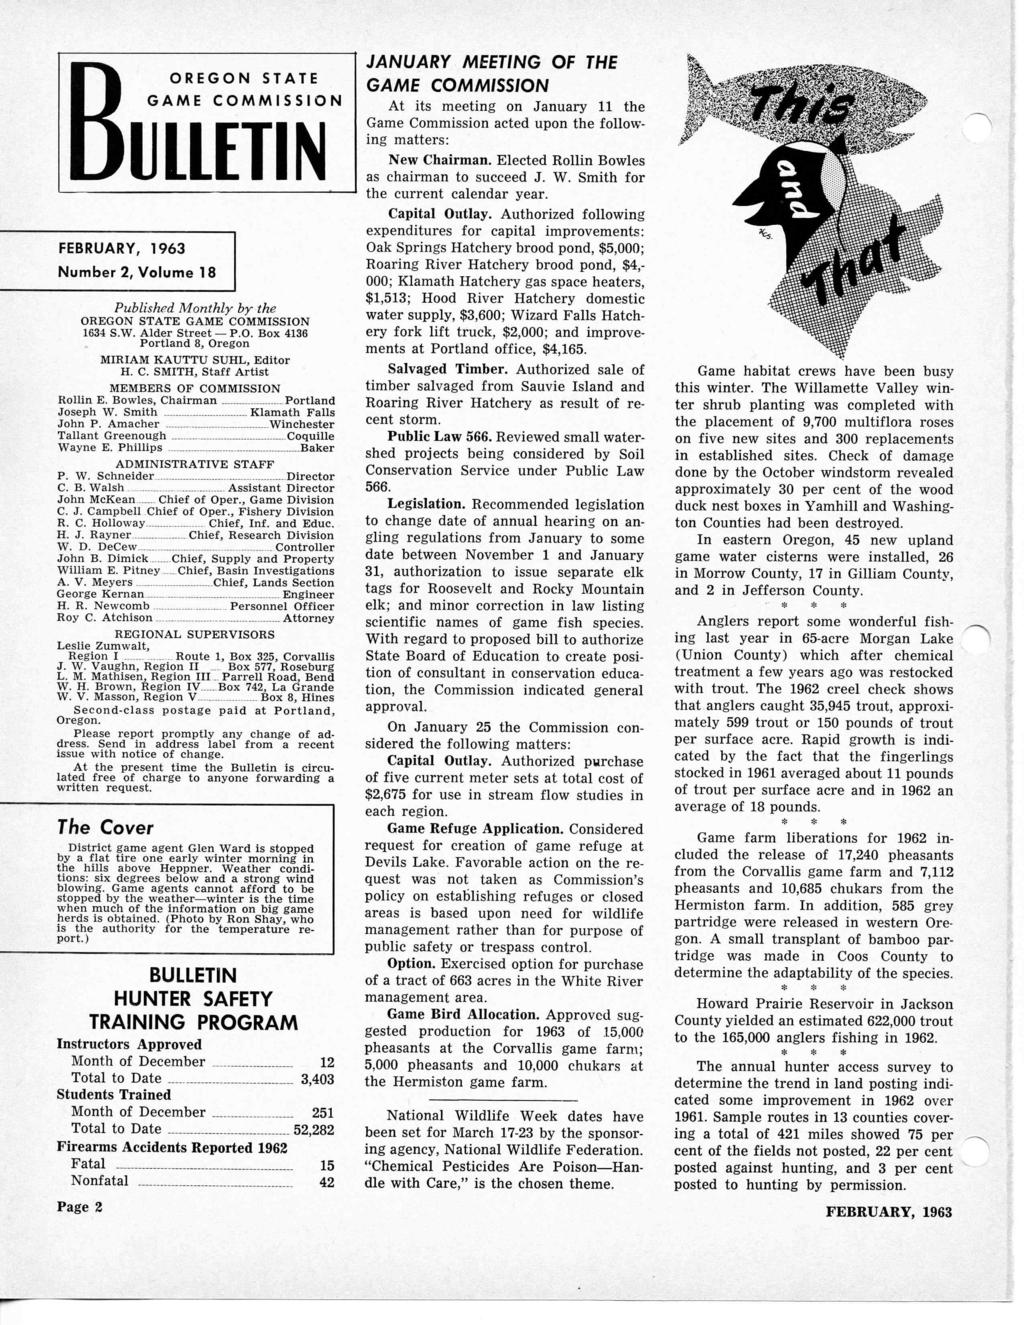 BOREGON STATE GAME COMMISSION ULLETIN FEBRUARY, 1963 Number 2, Volume 18 Published Monthly by the OREGON STATE GAME COMMISSION 1634 S.W. Alder Street P.O. Box 4136 Portland 8, Oregon MIRIAM KAUTTU SUHL, Editor H.